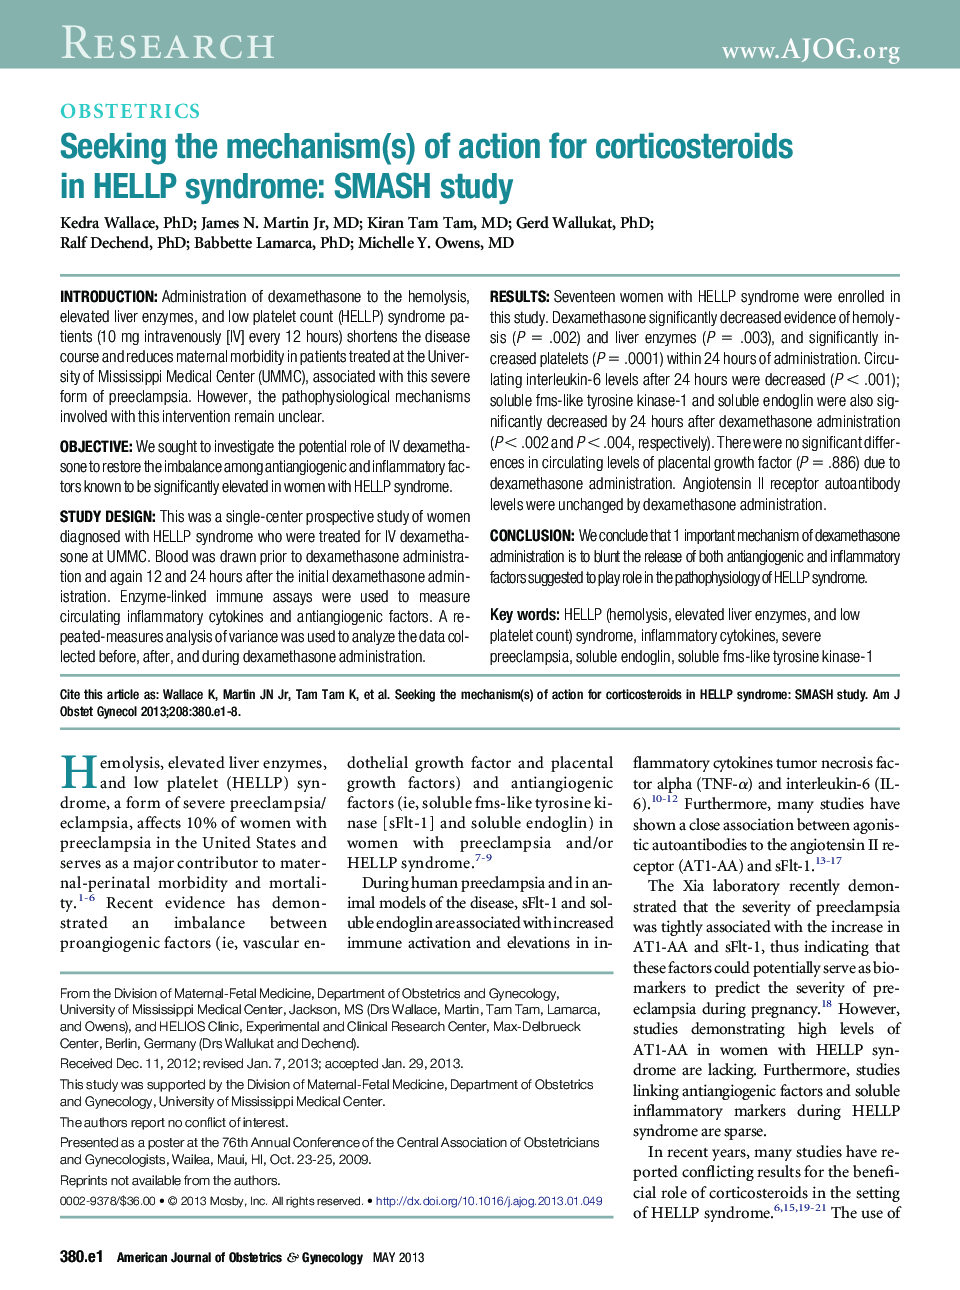 Seeking the mechanism(s) of action for corticosteroids in HELLP syndrome: SMASH study